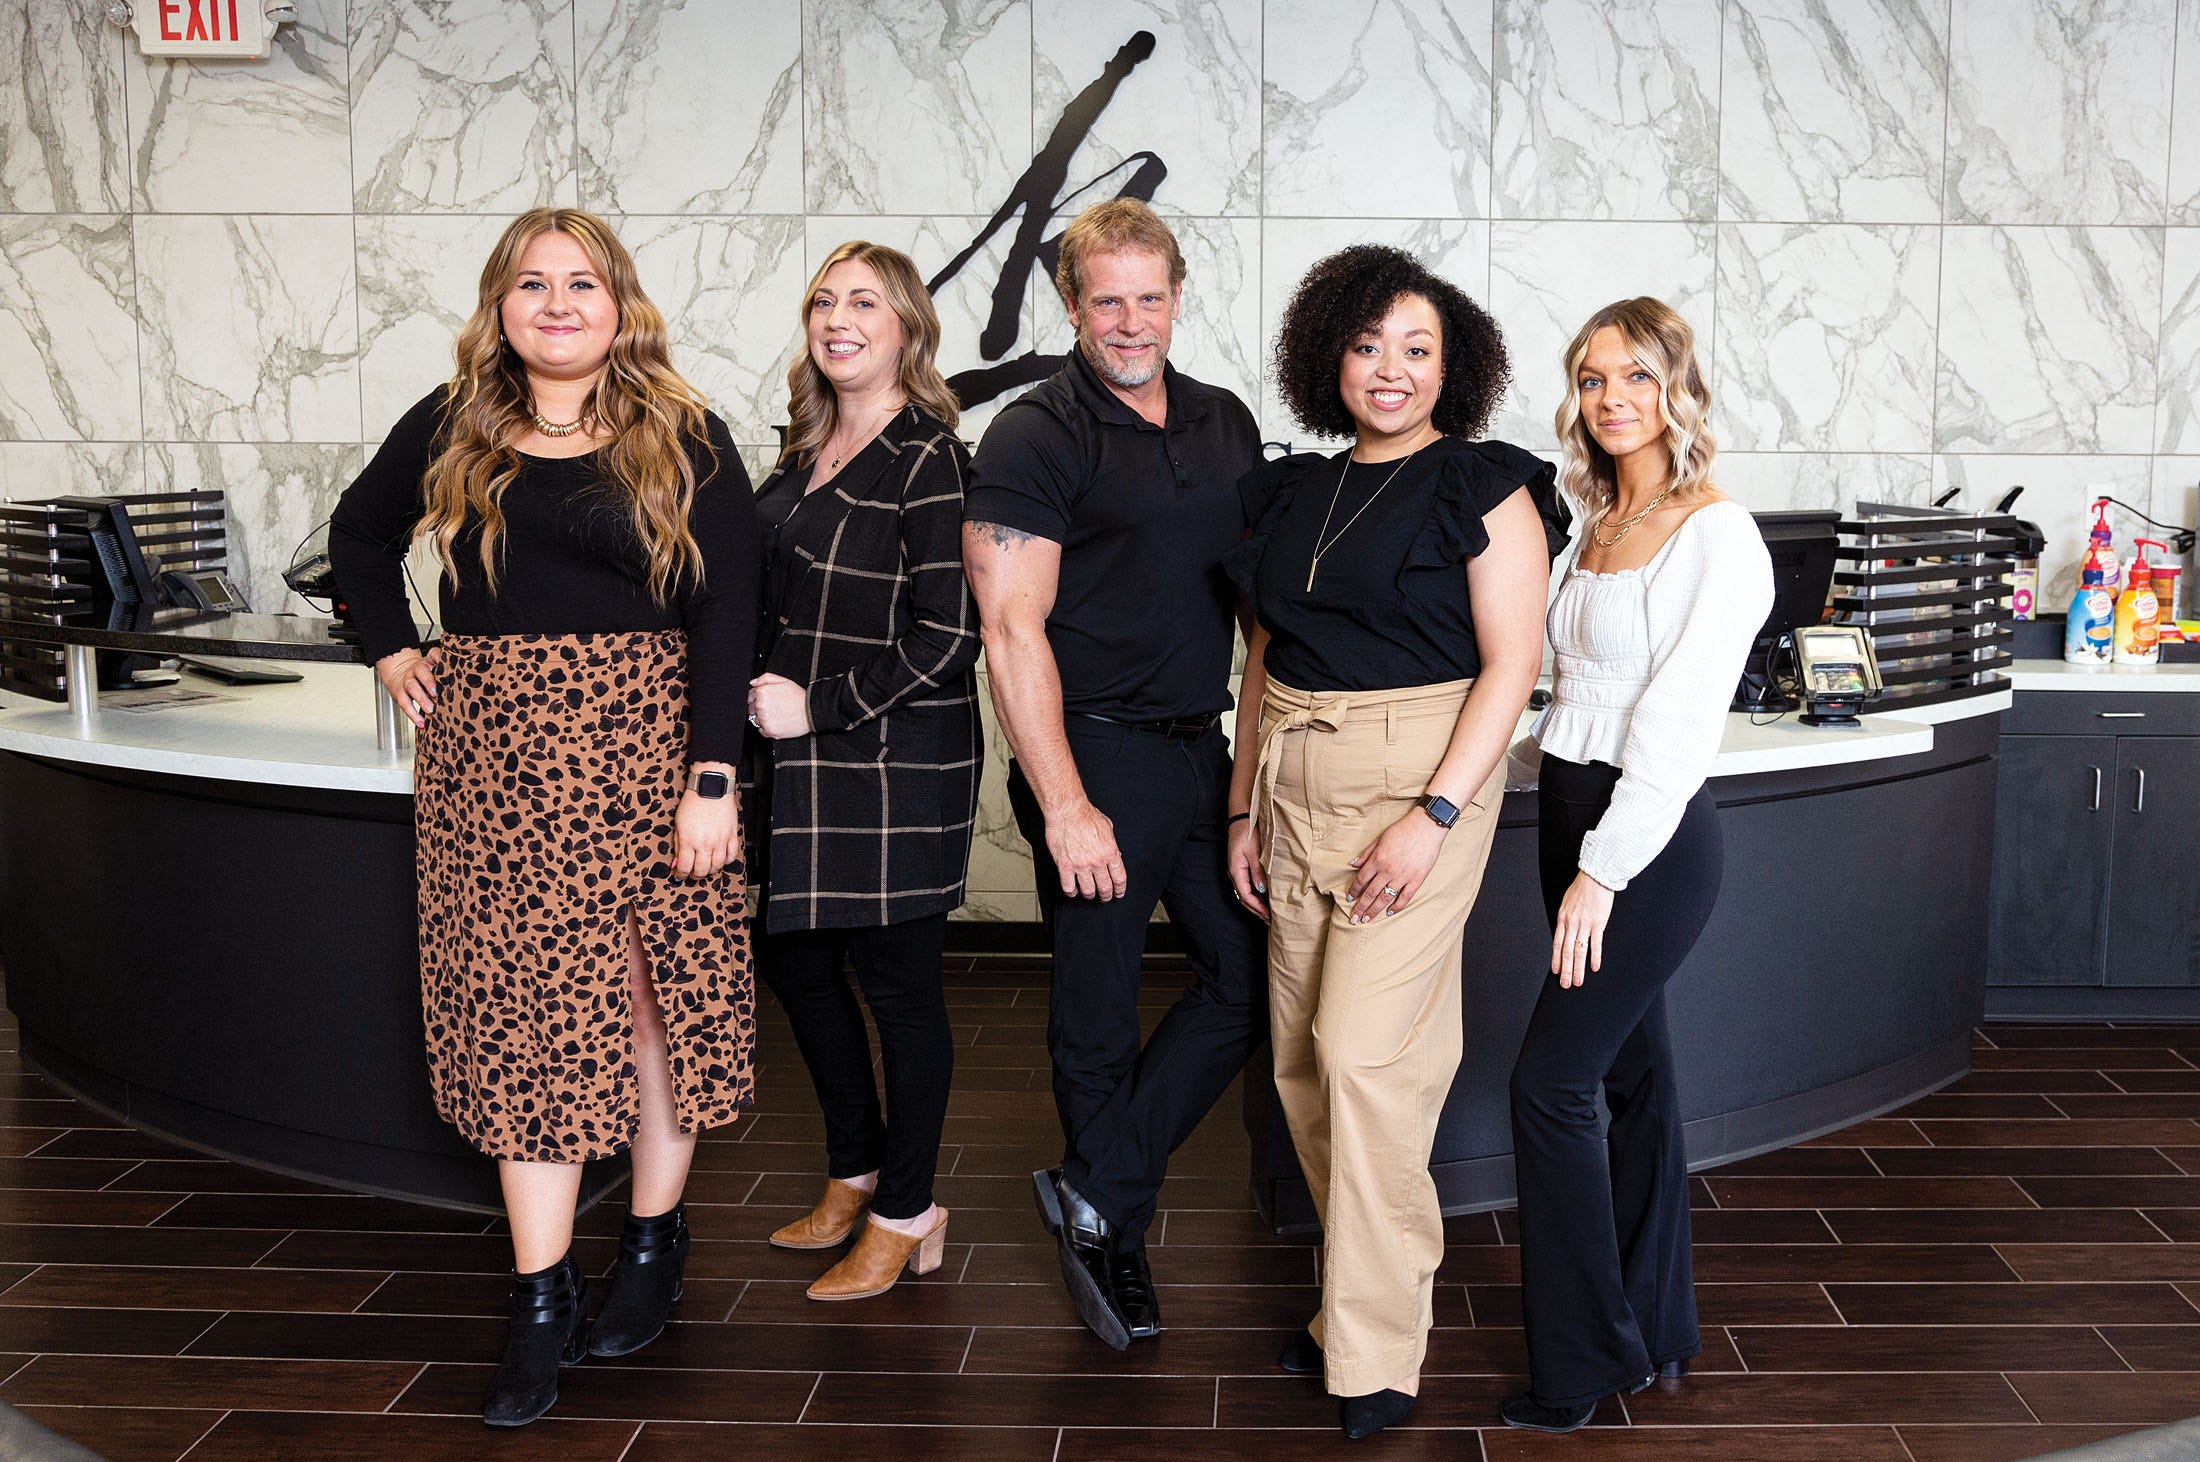 Columbus CEO Top Workplaces: Kenneth's Hair Salons